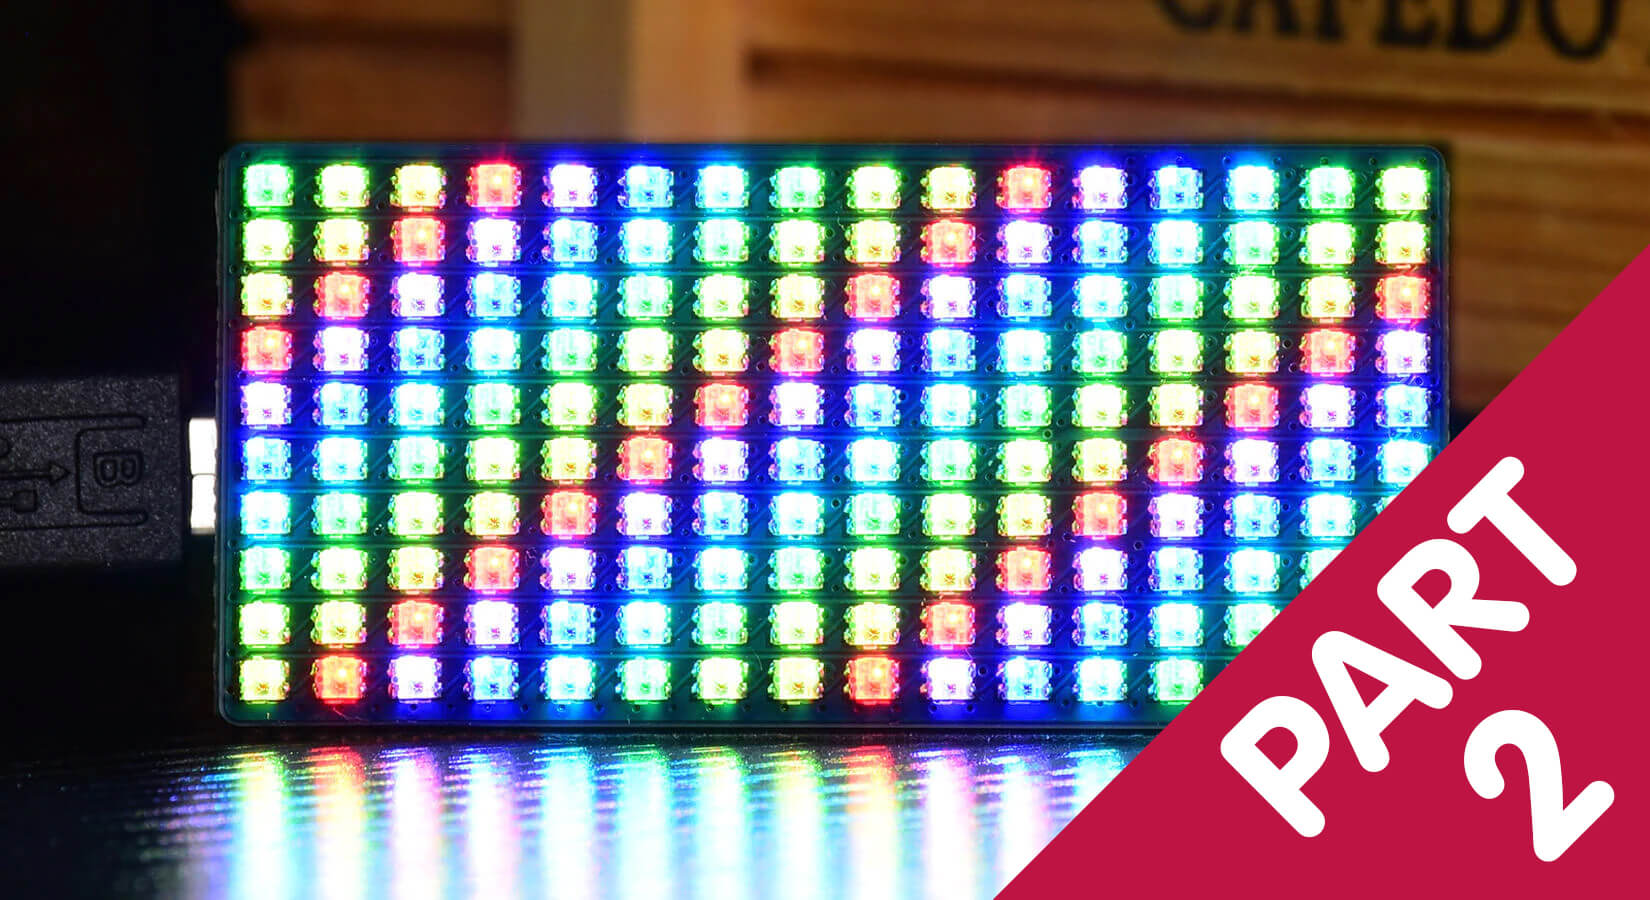 How to use the Waveshare RGB Full-colour LED Matrix Panel for Raspberry Pi Pico - Part 2